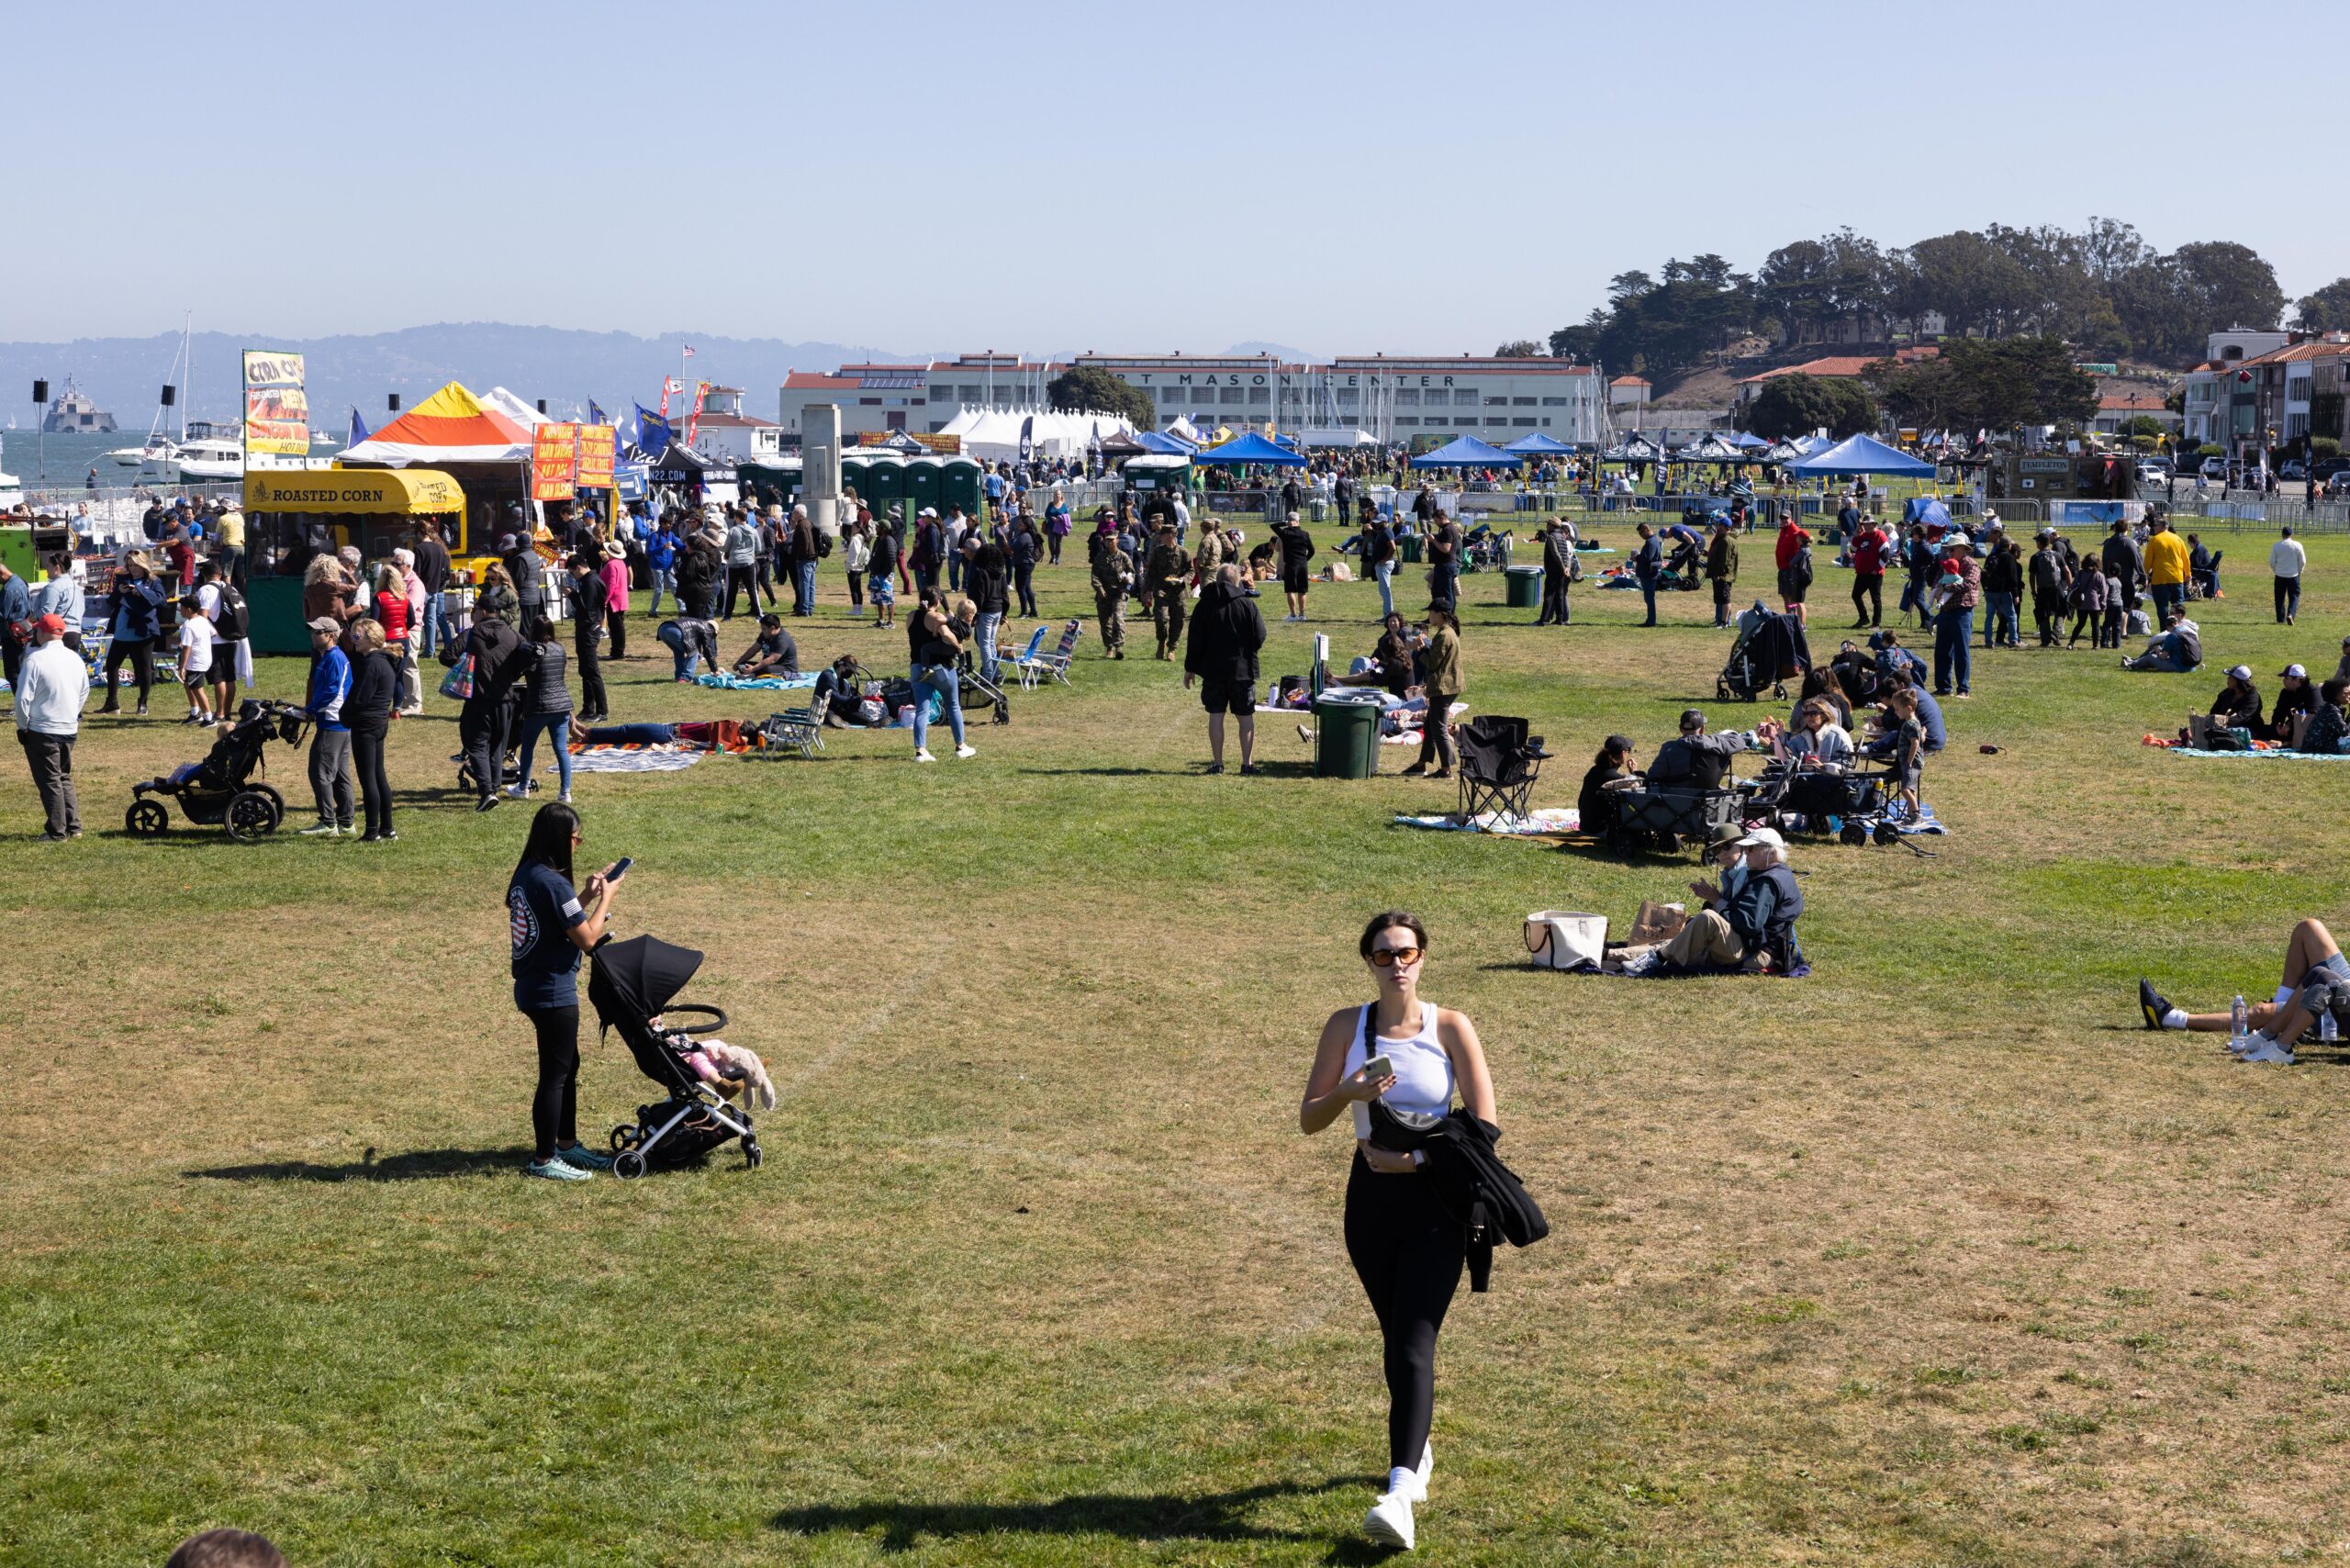 Federal Government Shutdown Could Hit National Parks in San Francisco During Fleet Week